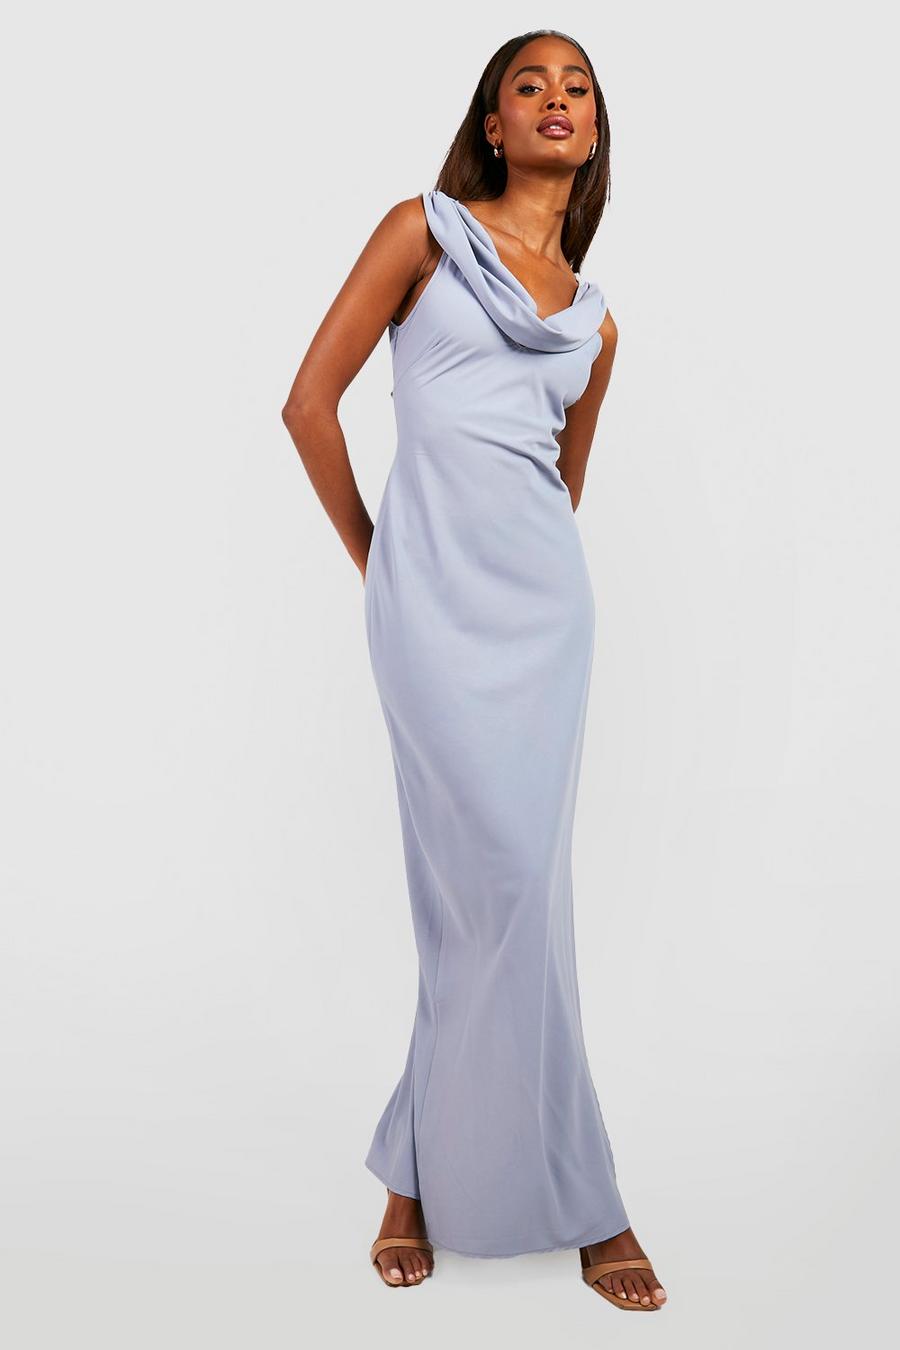 High Neck Satin Bridesmaid Dress with Strappy Back